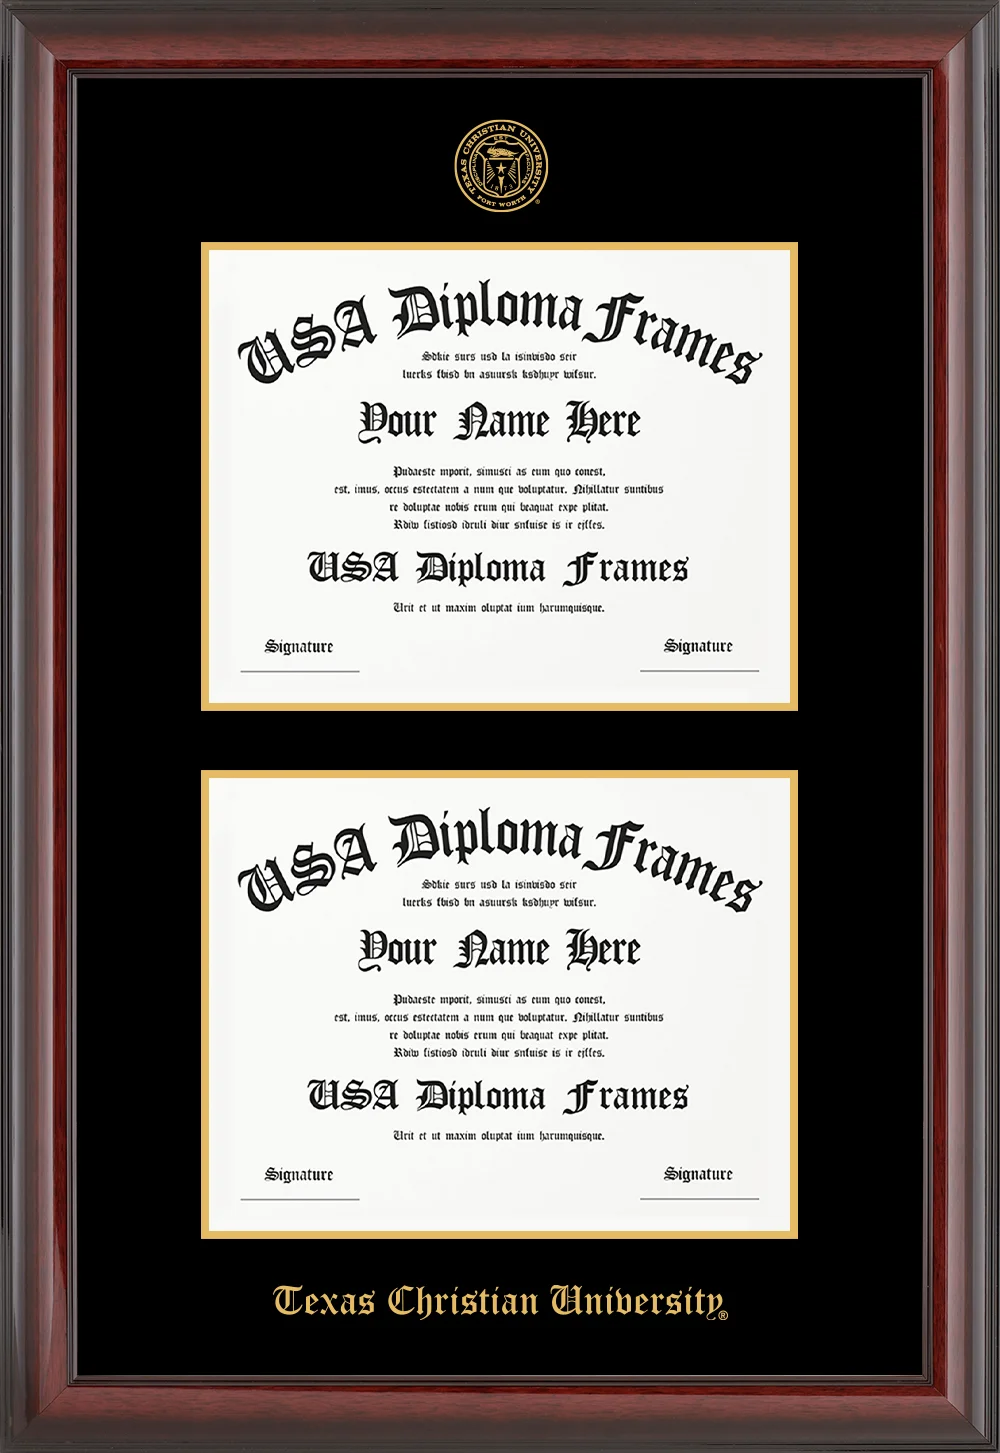 Double - Horizontal Documents - Cherry Mahogany Glossy Moulding - Black Mat - Gold Accent Mat - Gold Embossing Diploma Frame